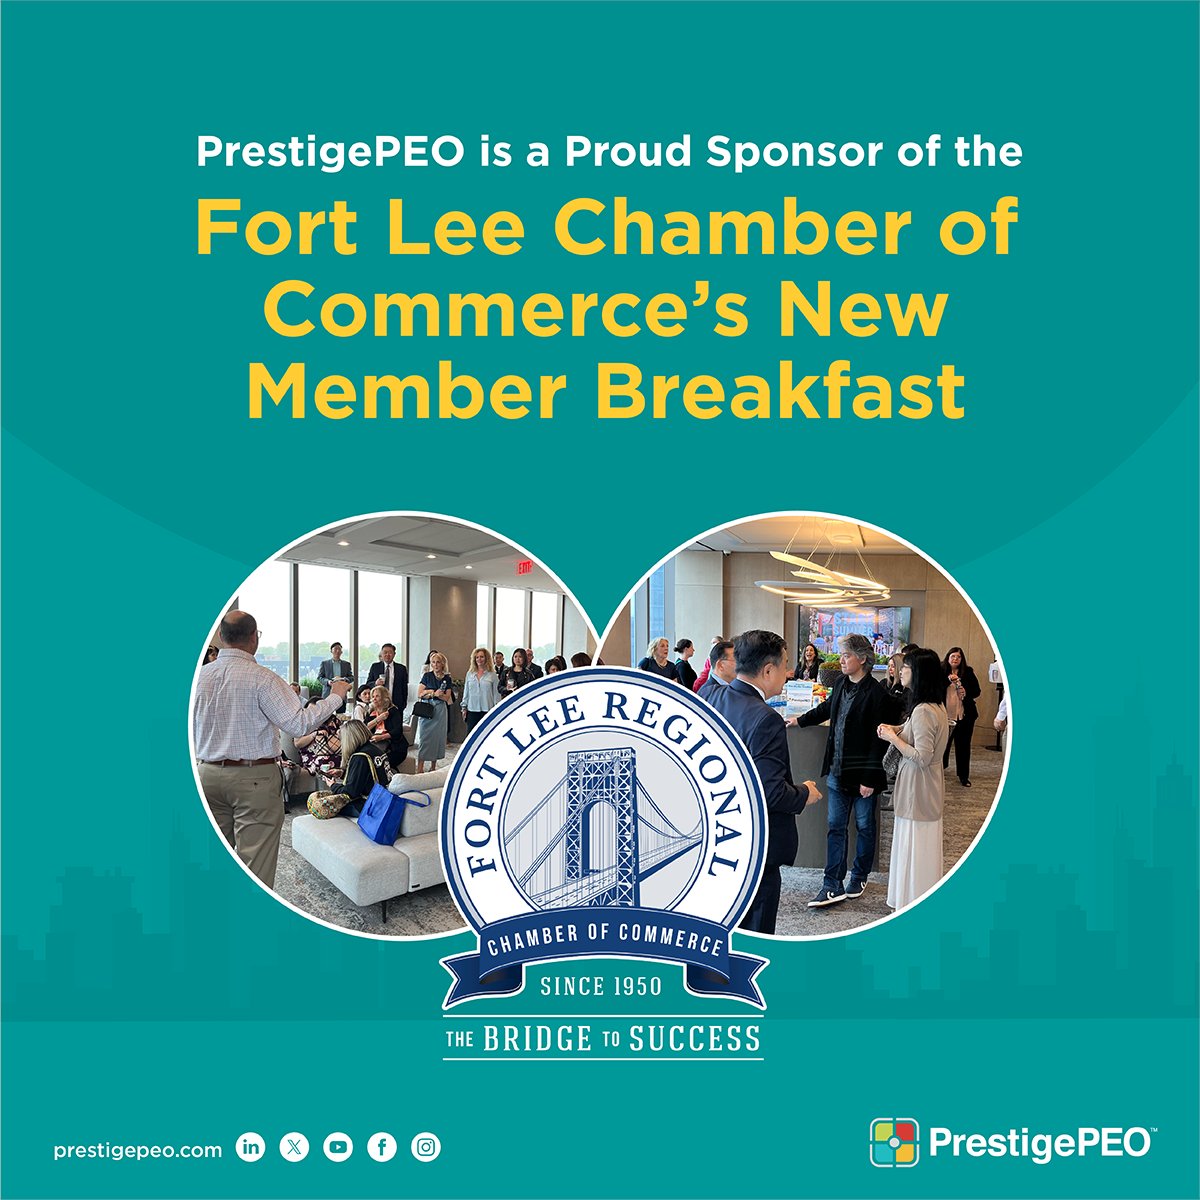 We are a proud sponsor of today’s New Member Breakfast, hosted by @FLRCC. #SmallBusiness owners in #BergenCounty got a chance to introduce their venture, and PrestigePEO Business Development Manager, Mitch, gave a thought-provoking keynote speech bit.ly/3U9A3iC